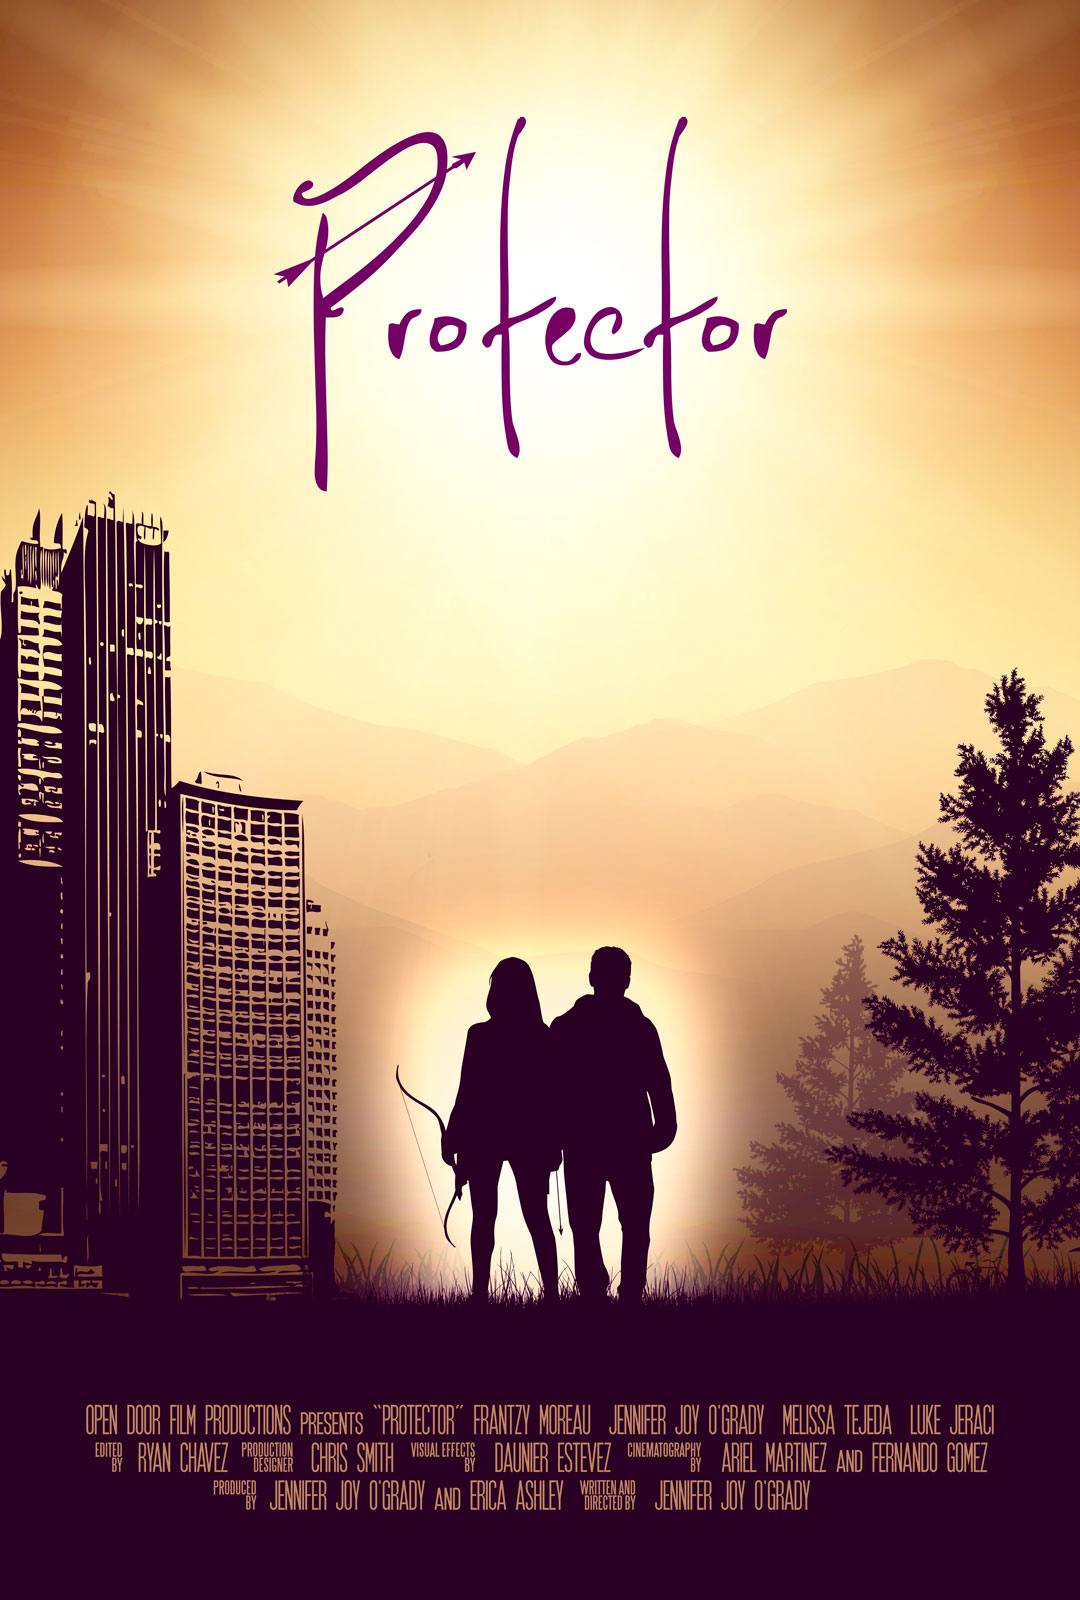 Protector Poster